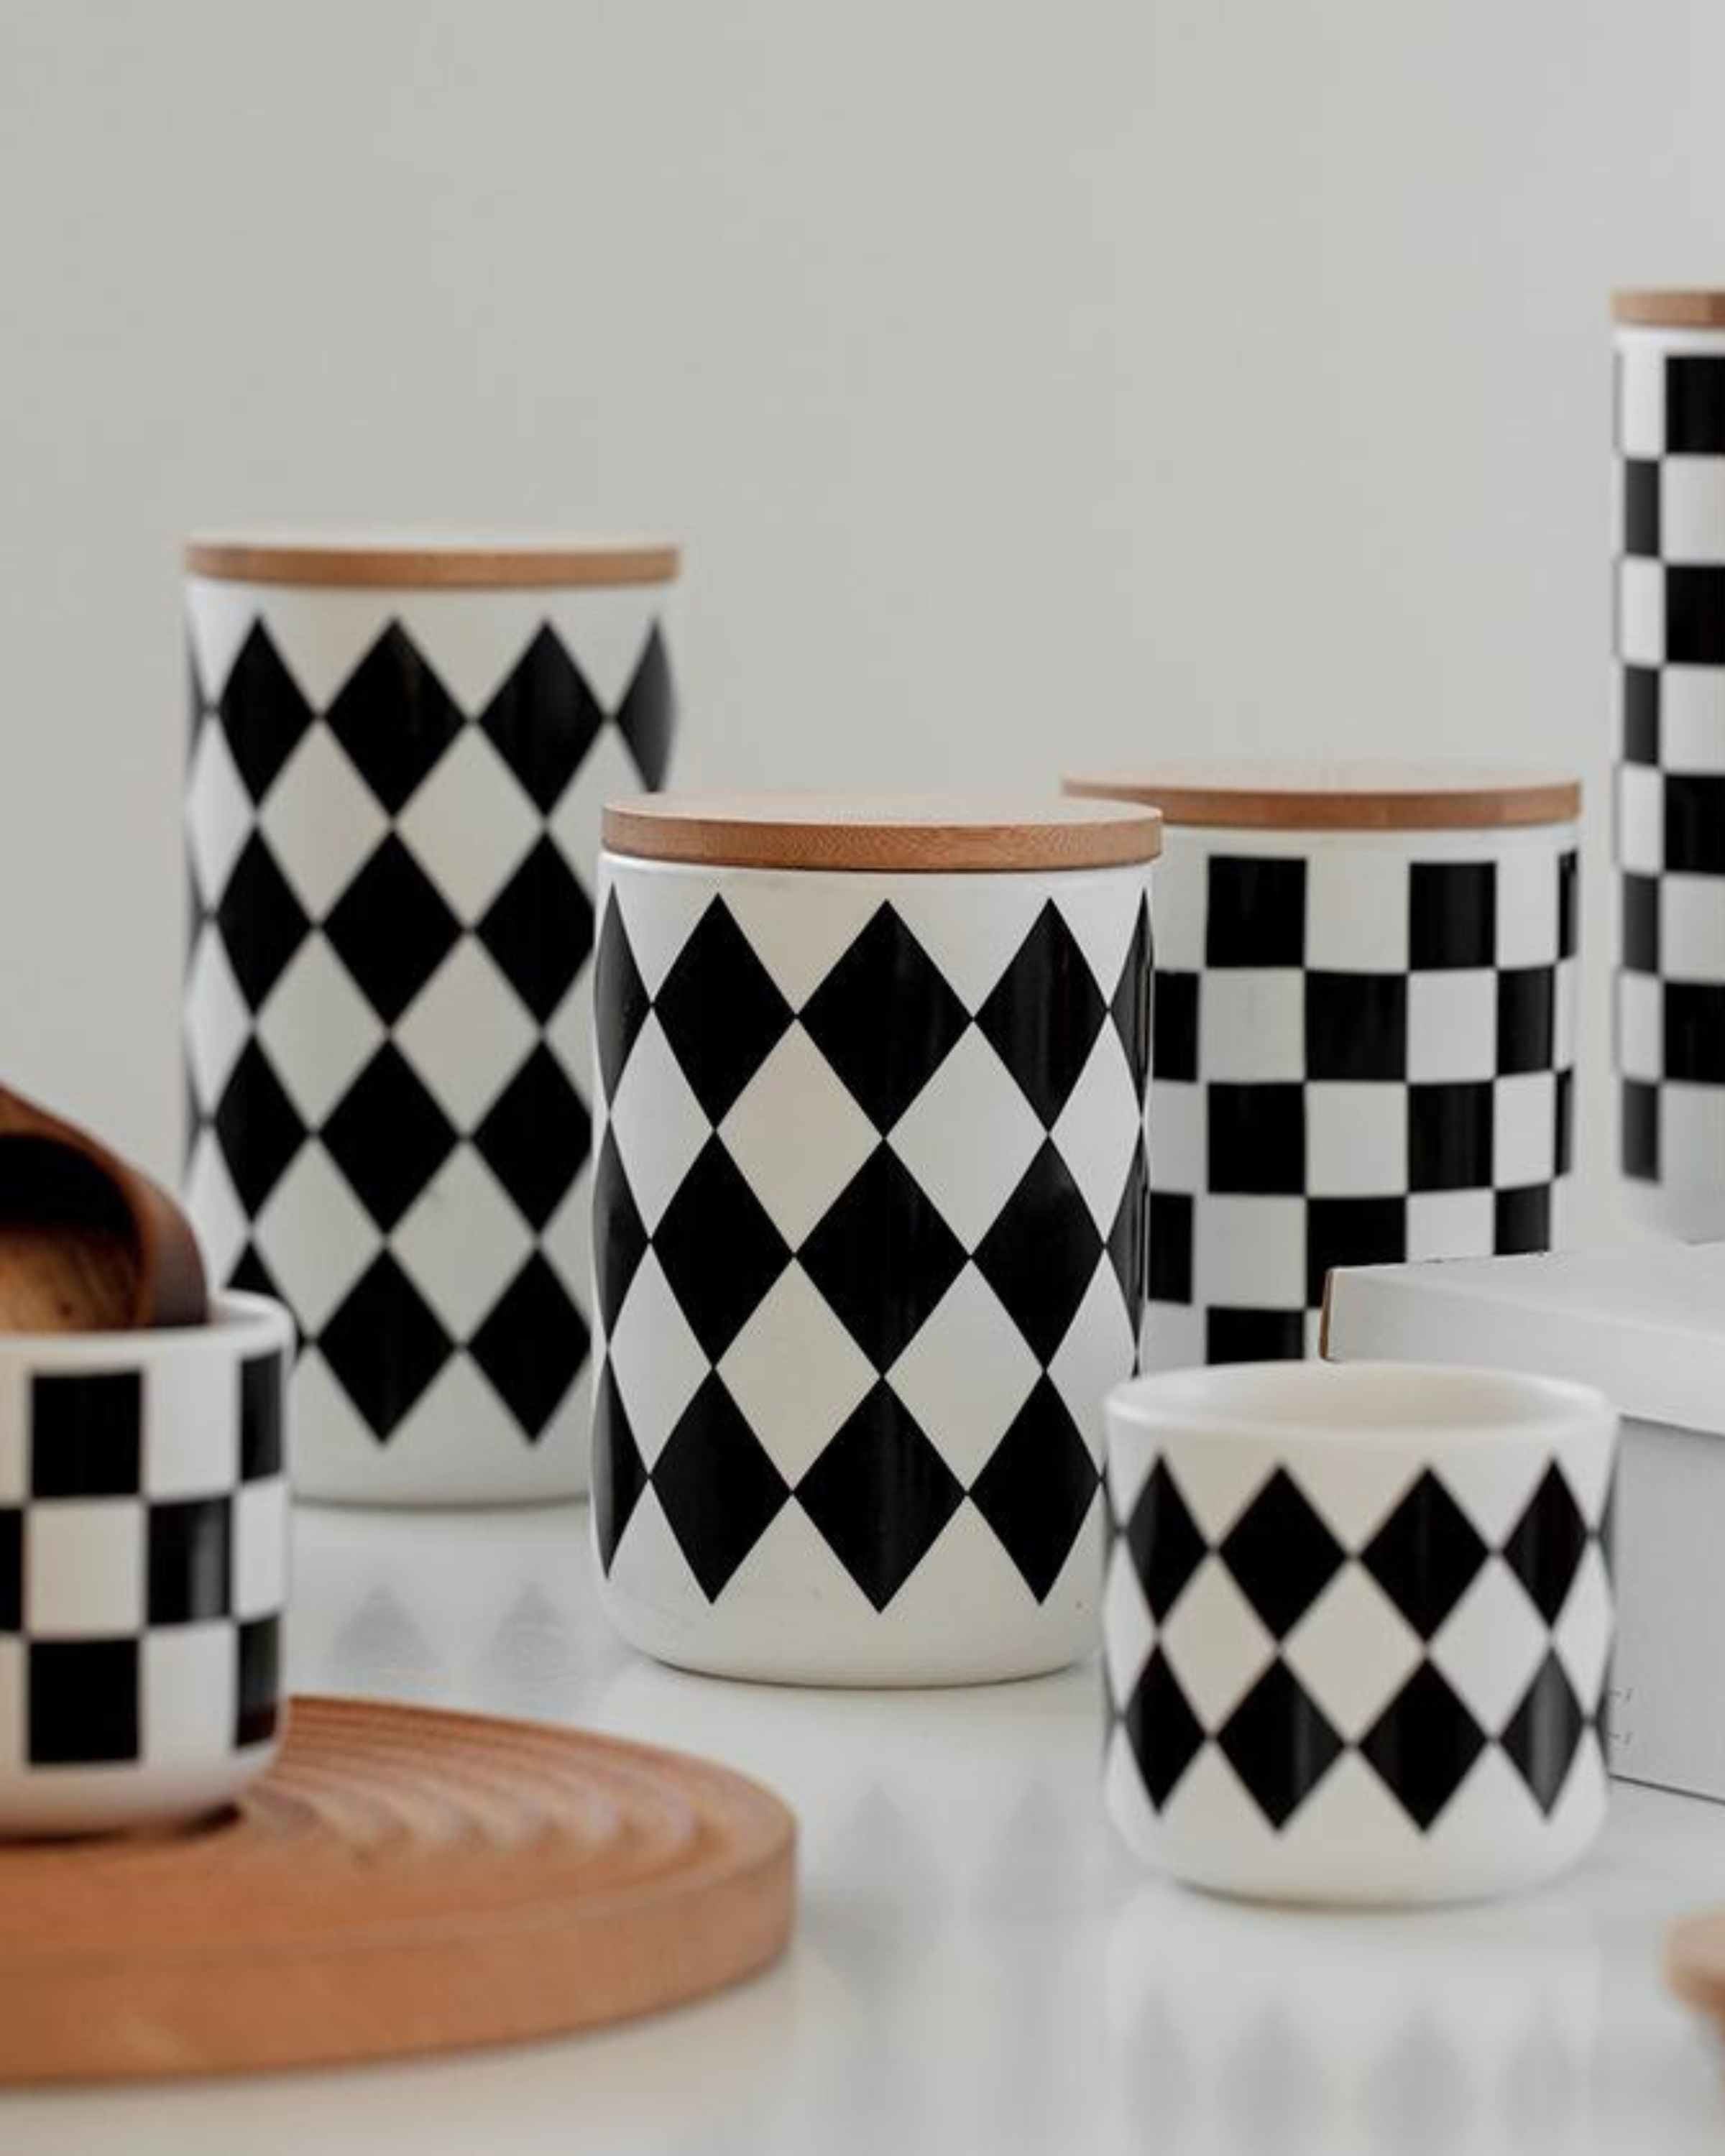 Buy Black White Ceramic Containers Online